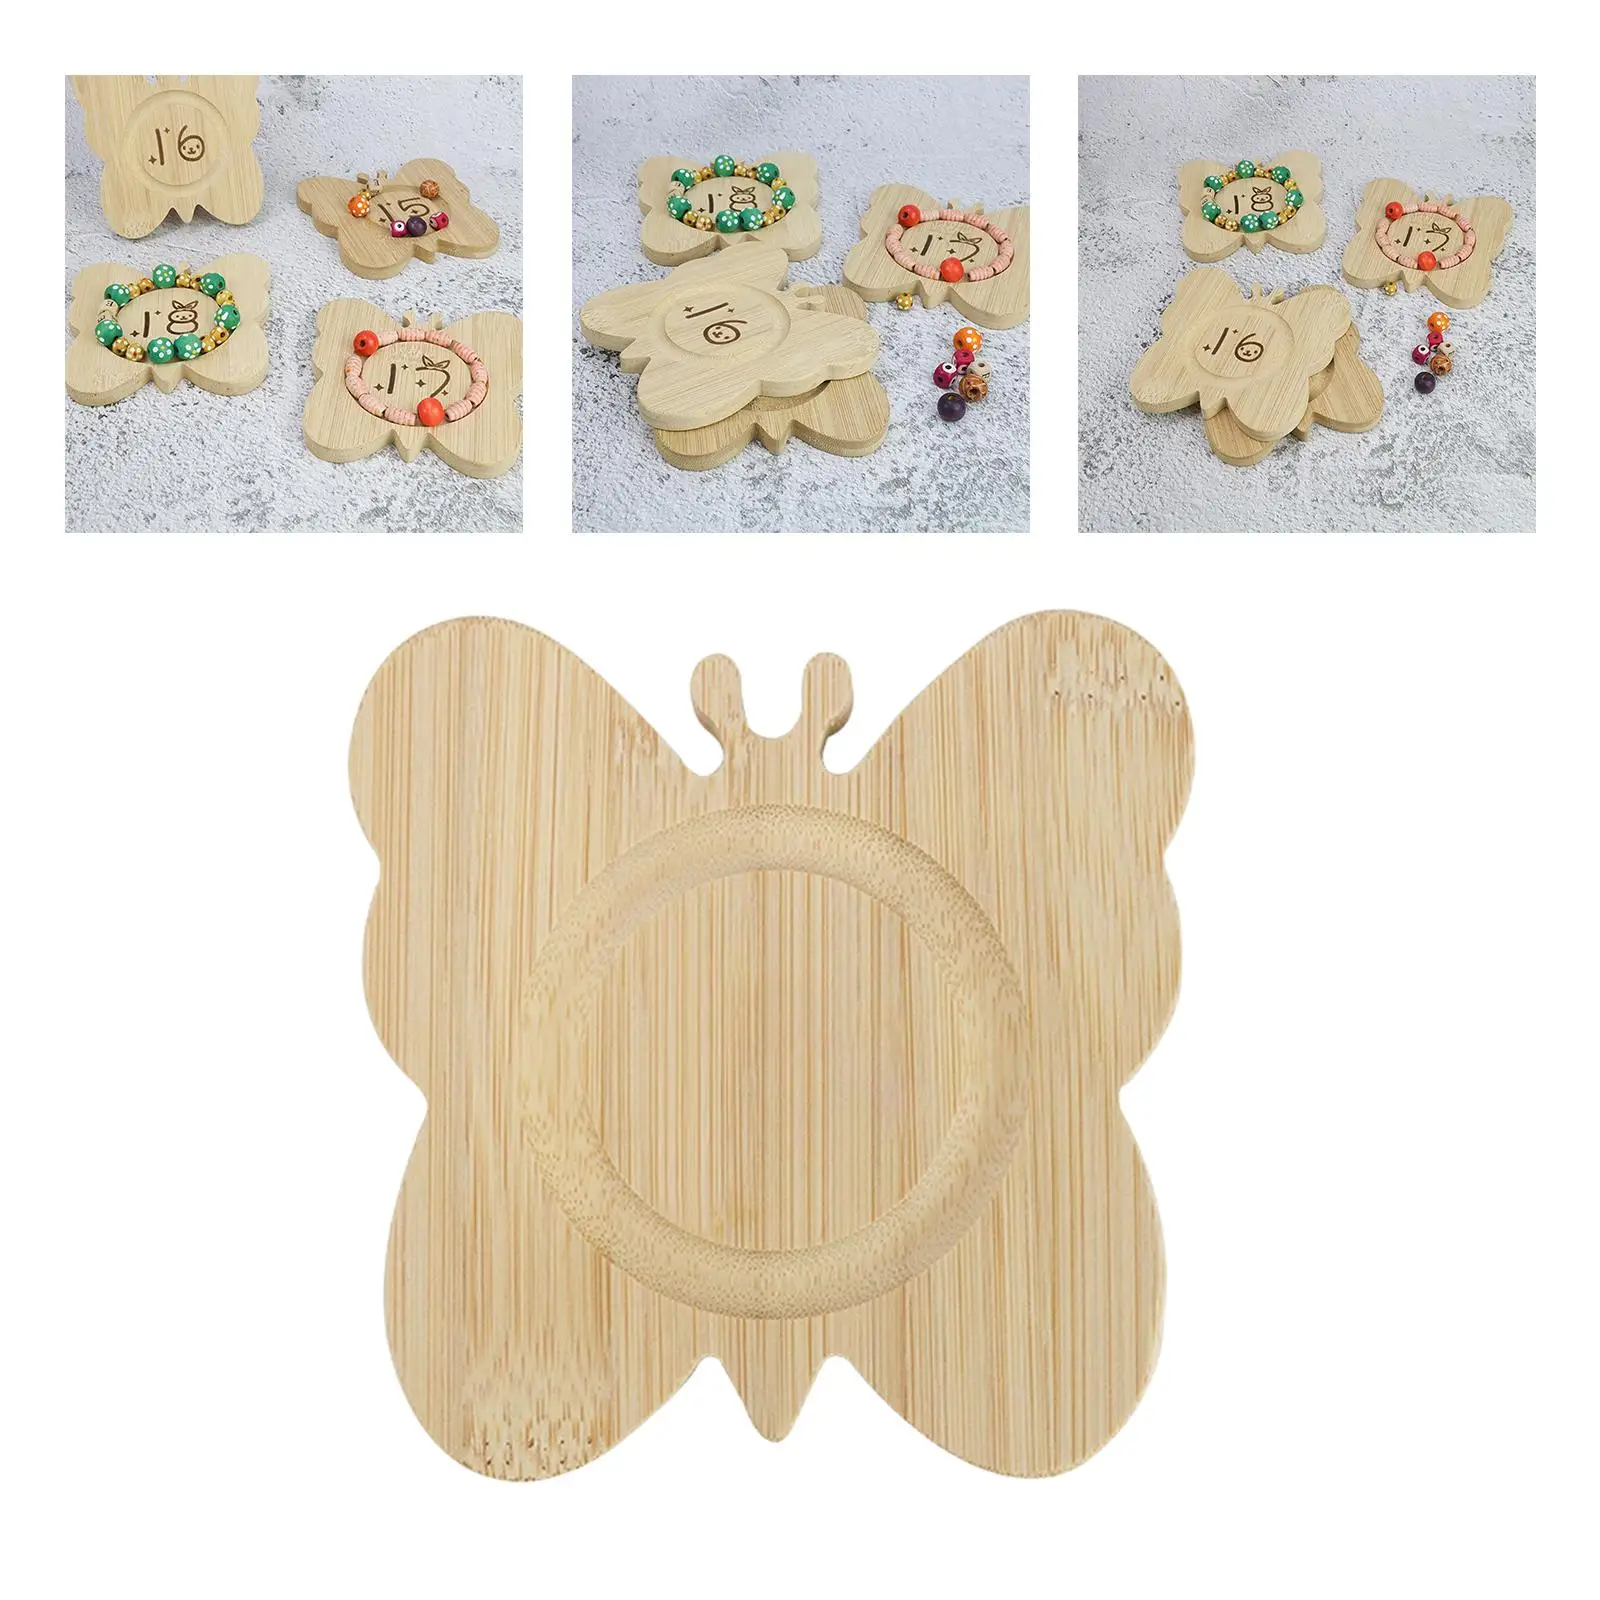 Wooden Holder Jewelry Storage 12cm Countertop Butterfly Shaped Holder Stand Dresser Store Decorative Gift Shop Bead Pendant Tray